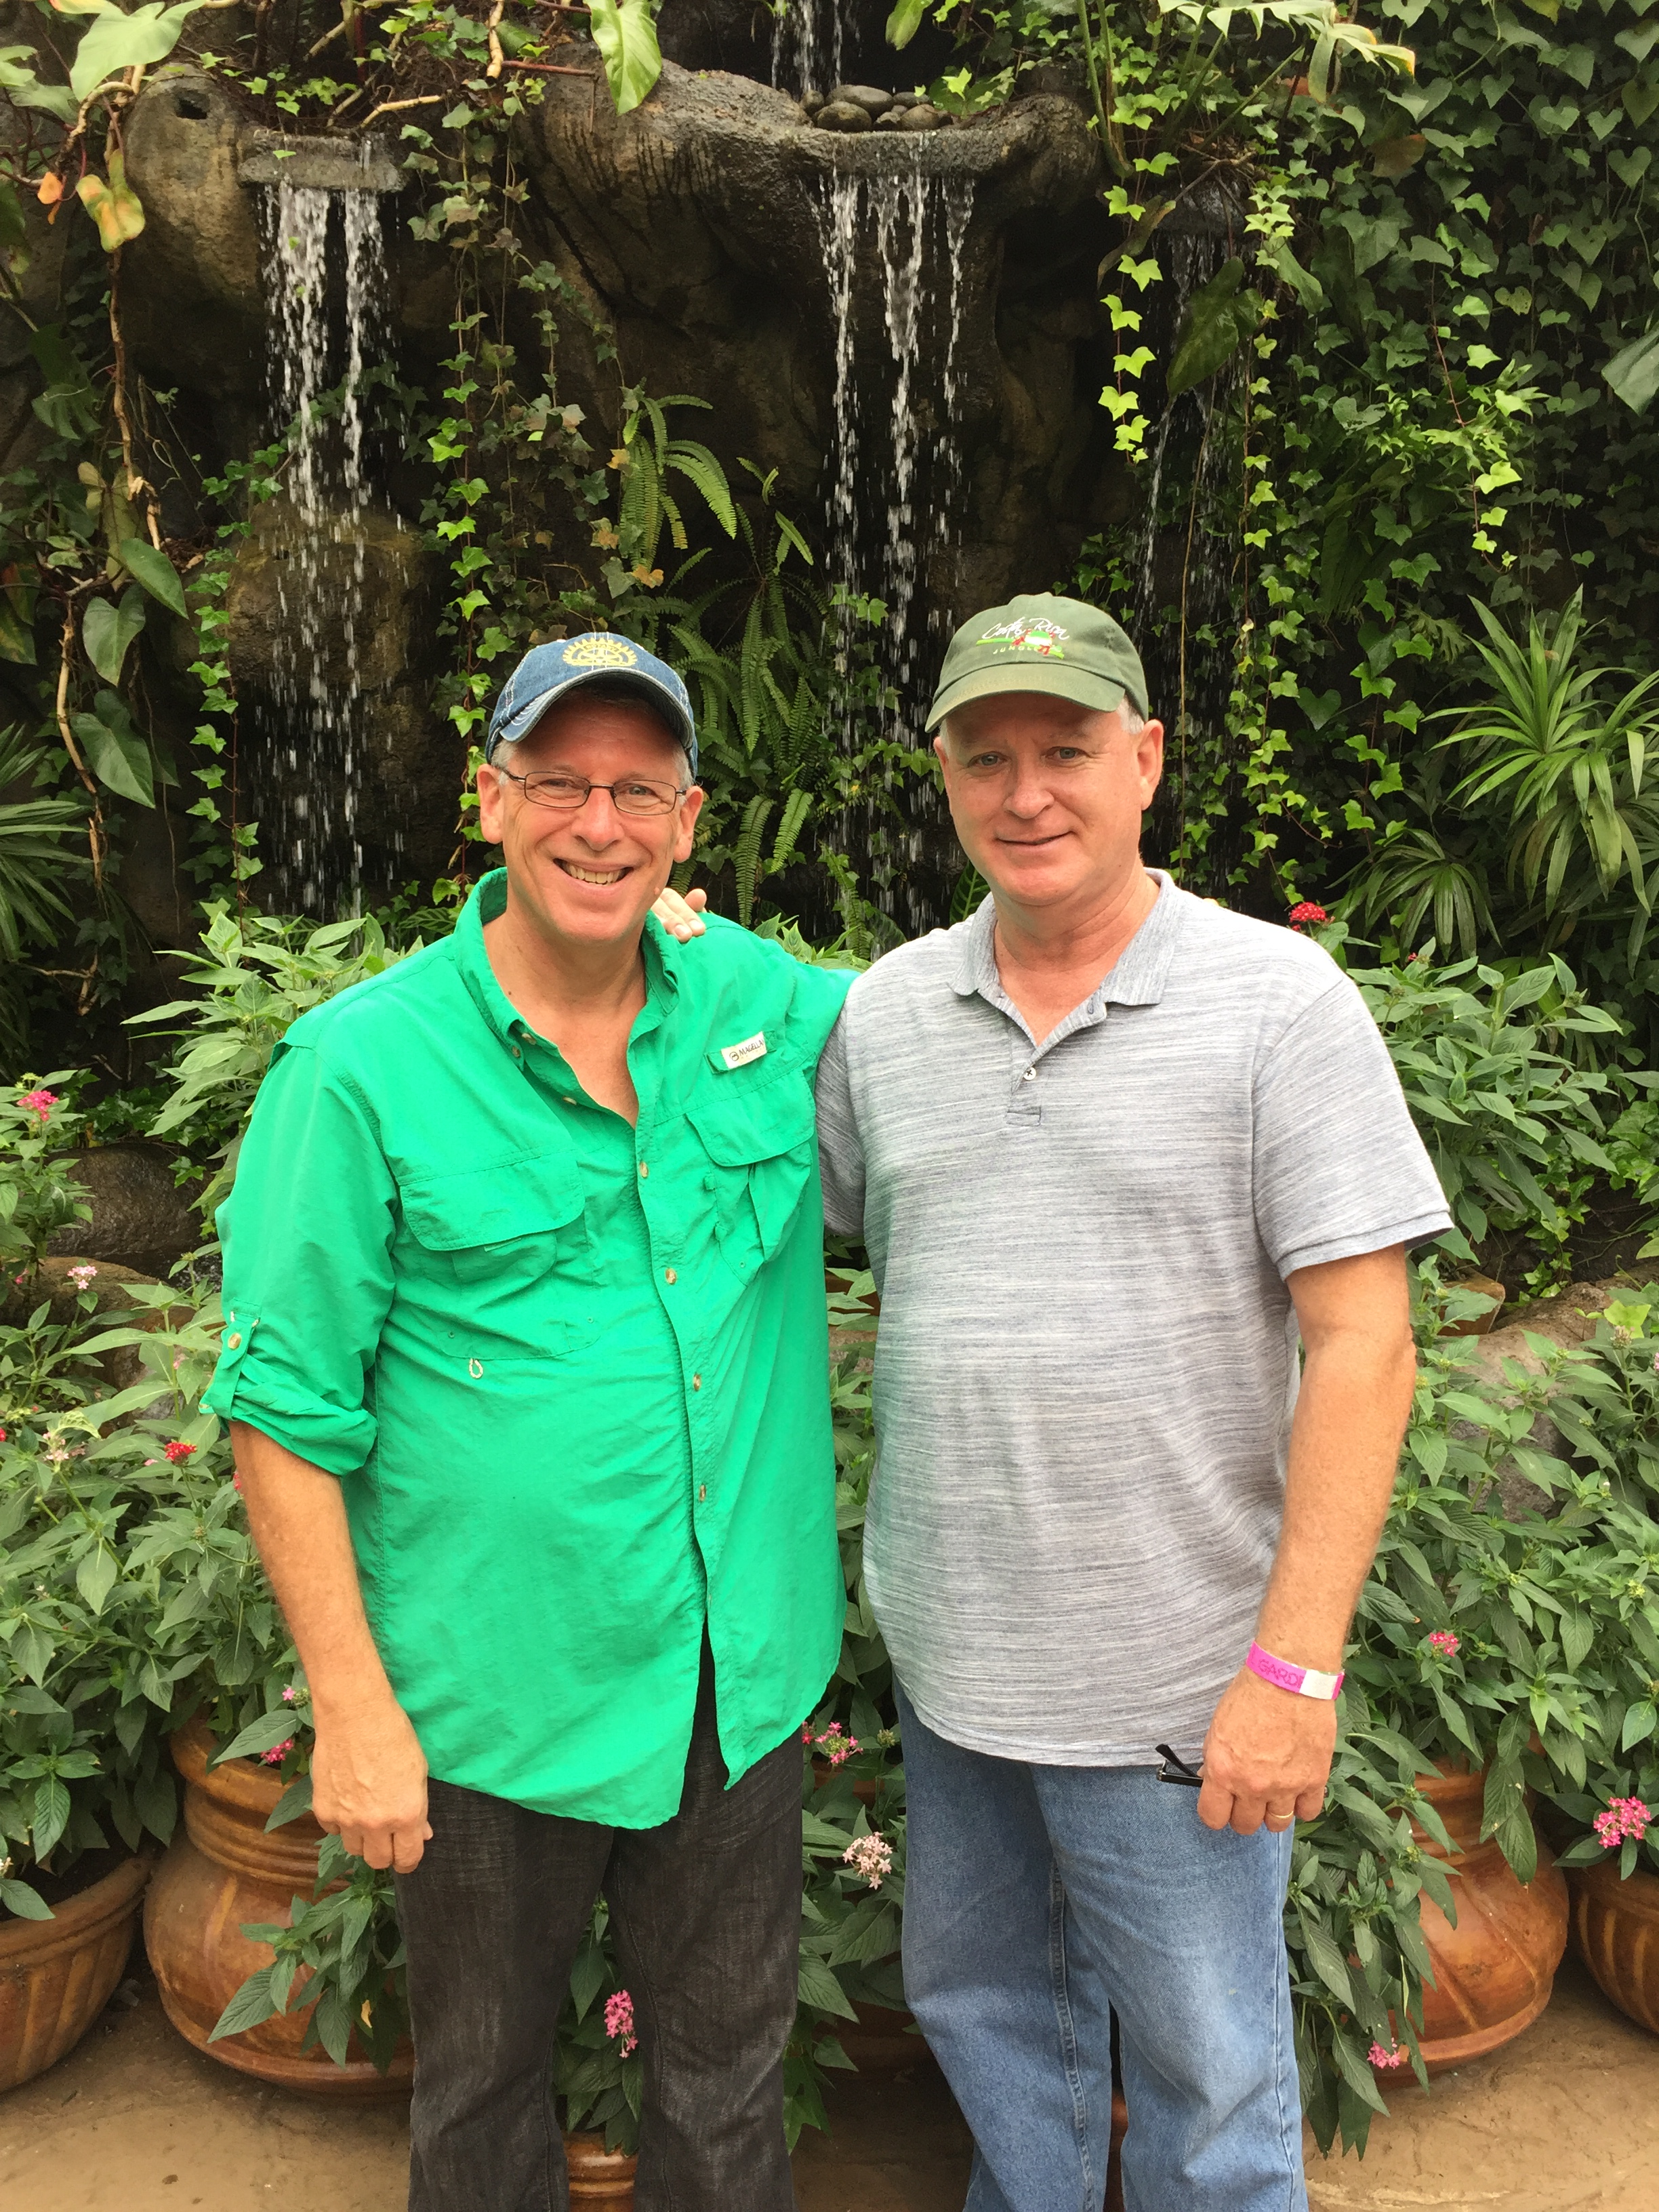 With my brother, Carl. His heart for the children of Costa Rica and his literacy work there is truly inspiring.